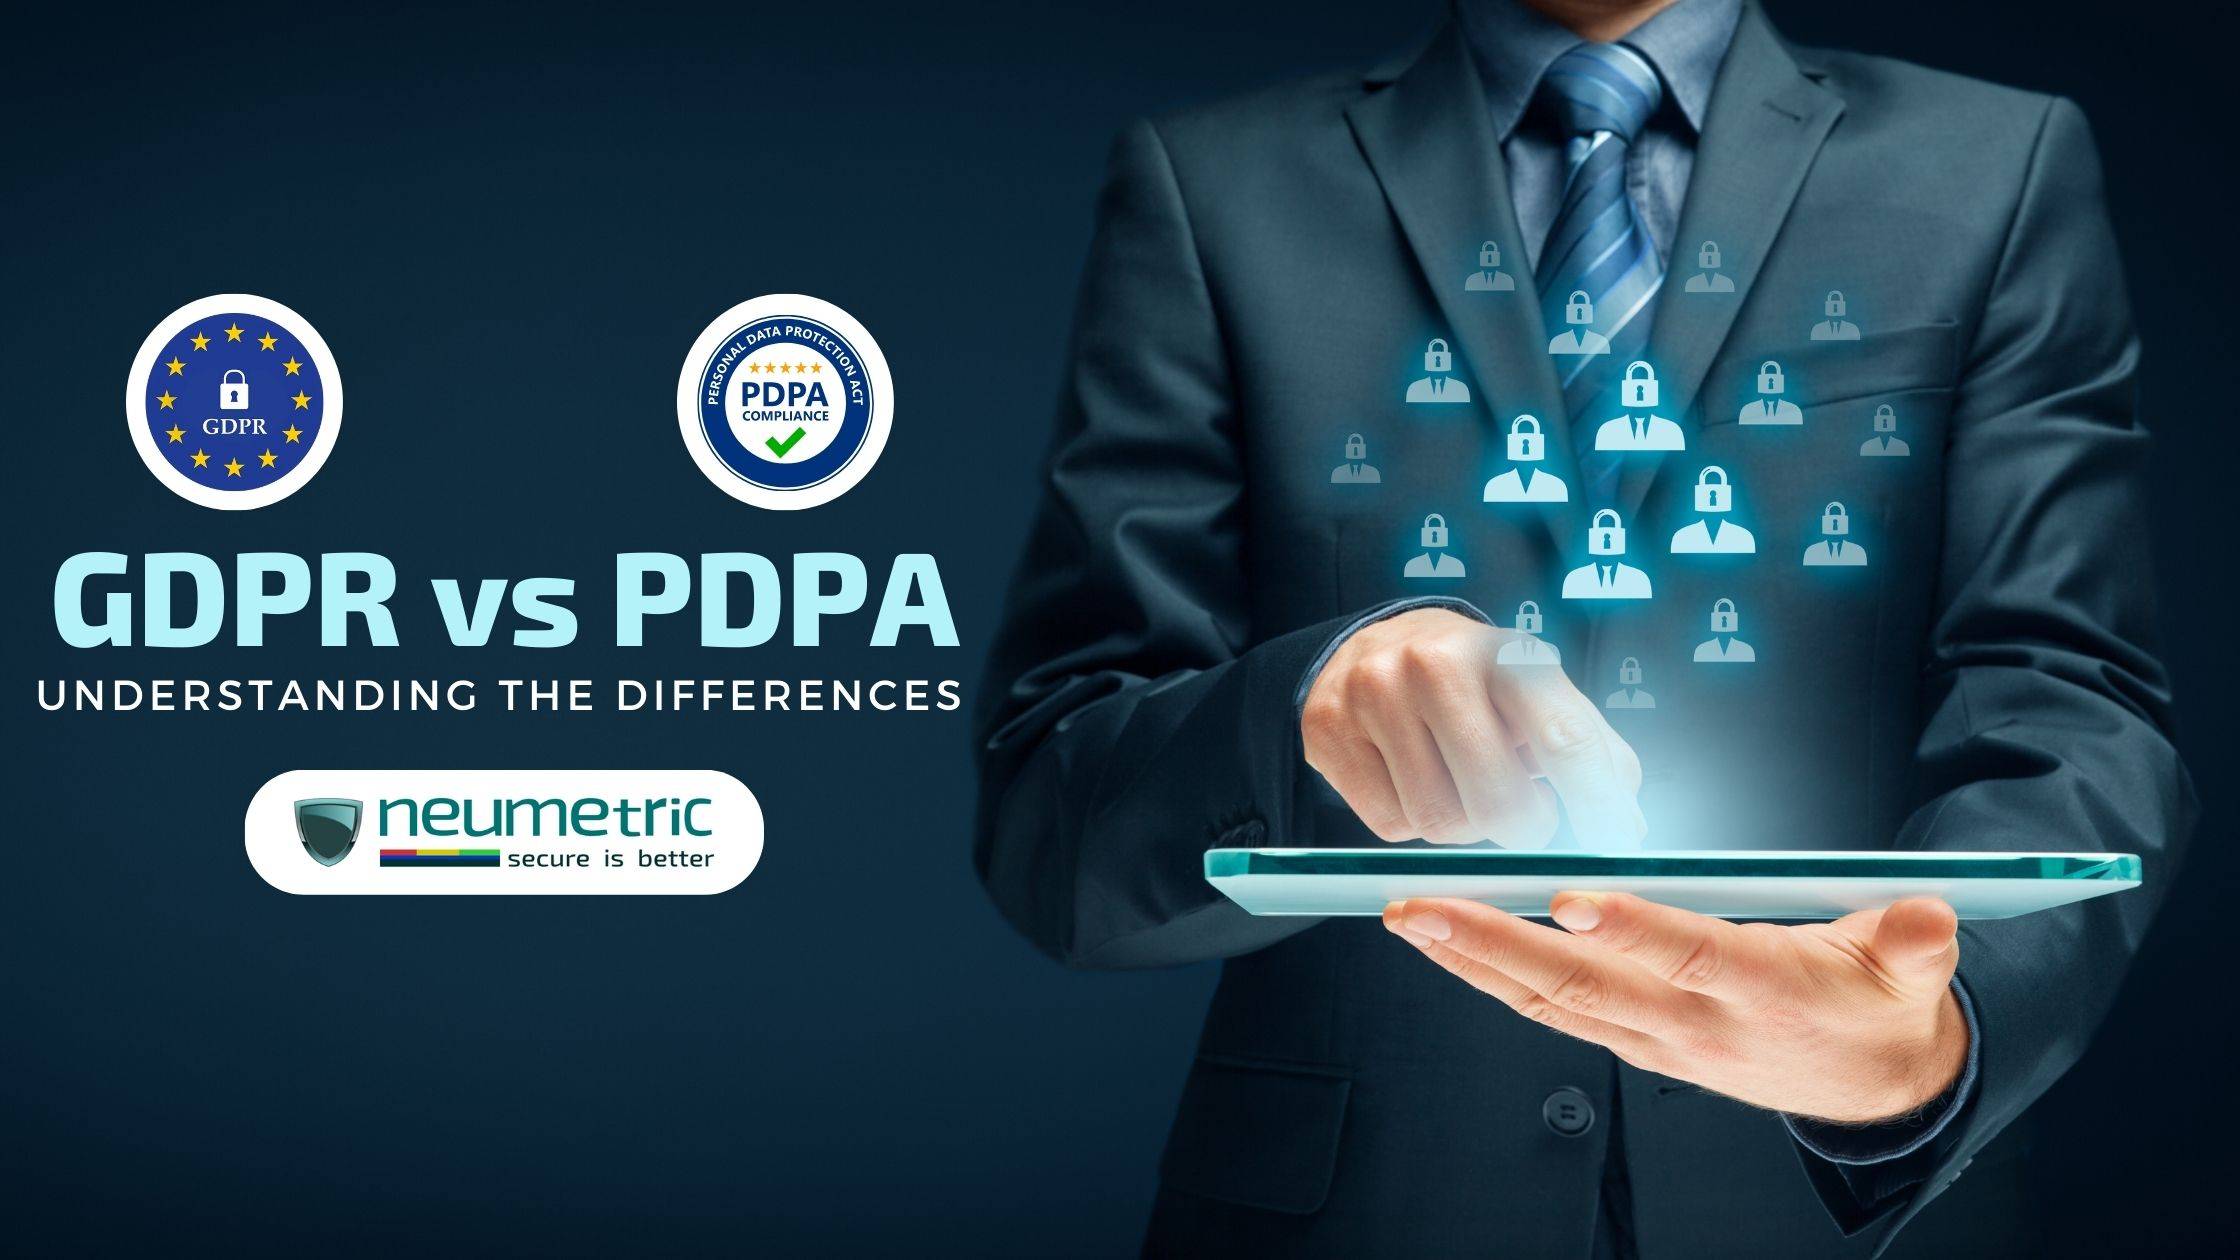 GDPR vs PDPA: Understanding the Differences